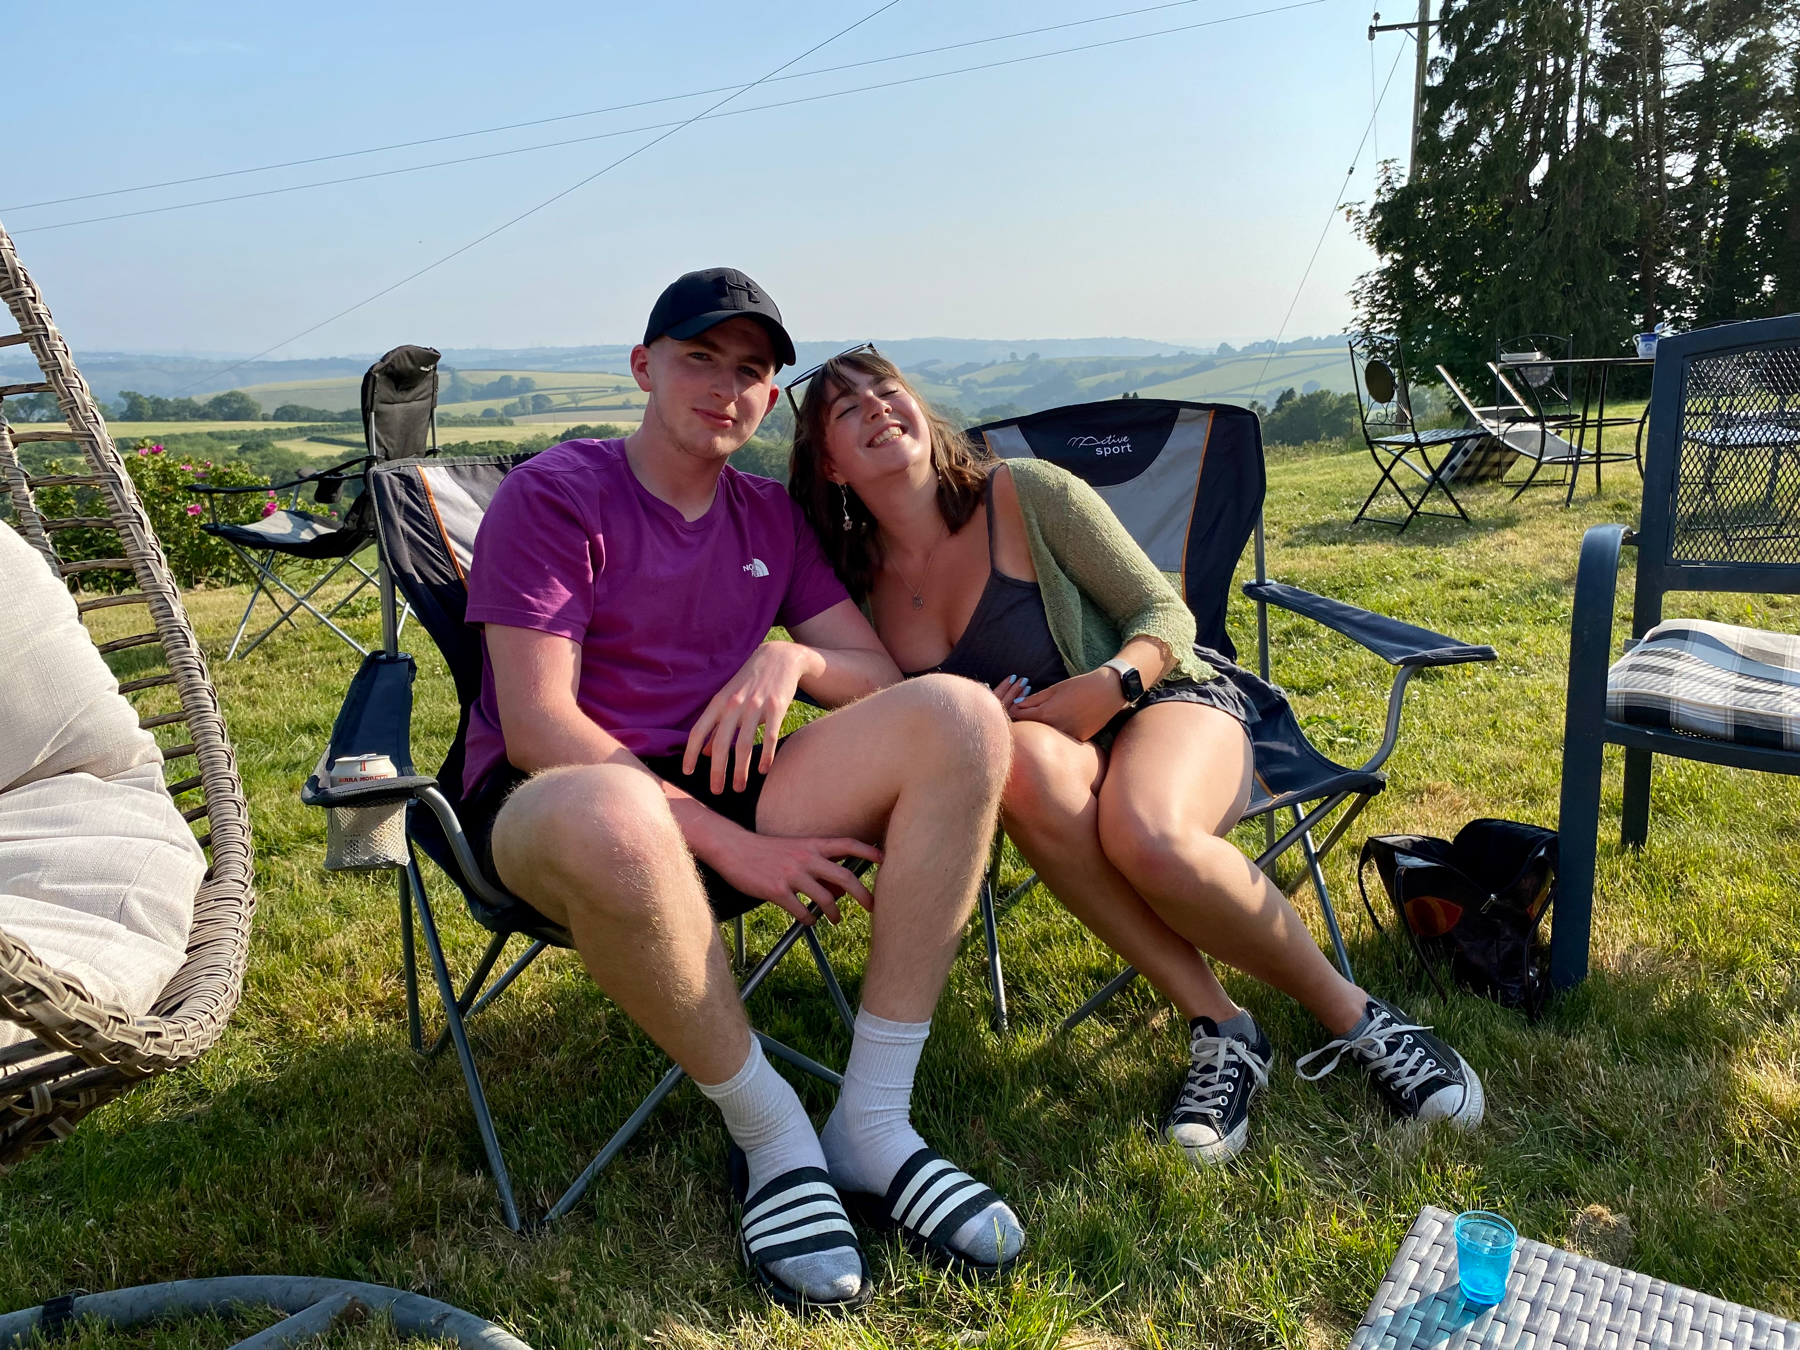 Young man and woman sitting next to each other on camping chairs, fields in background